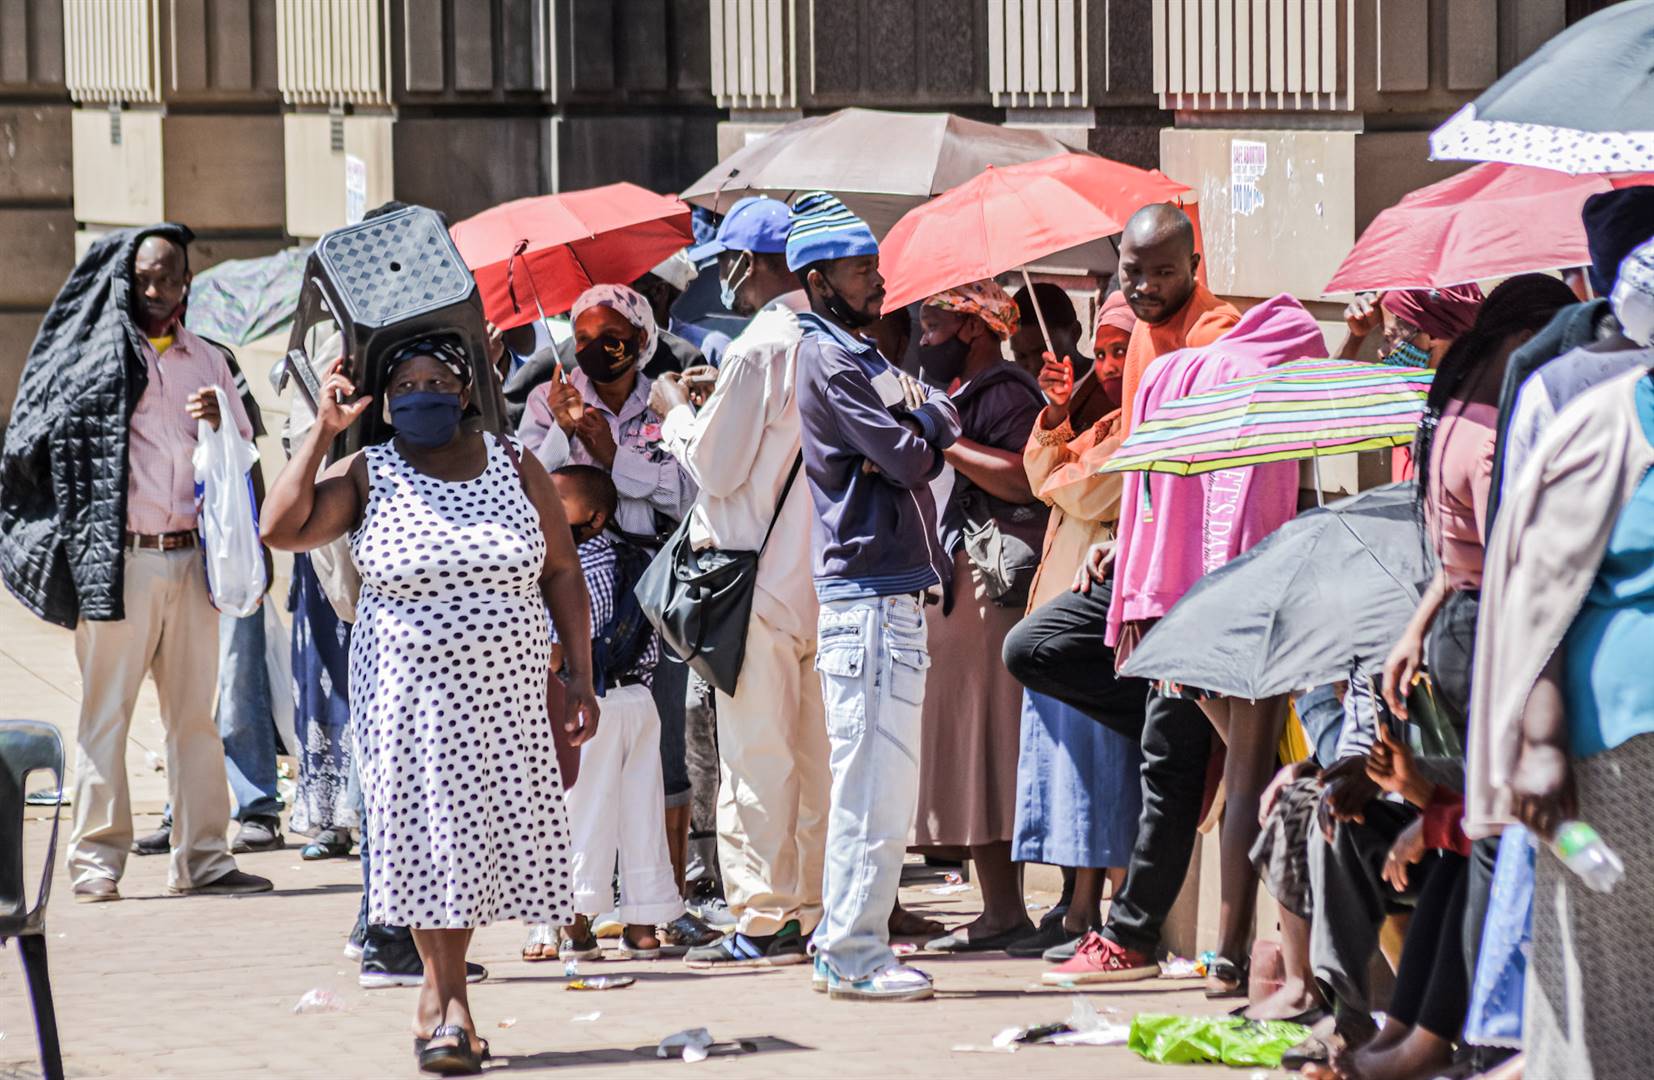 Social grant recipients queue for hours in the hot sun outside the main post office in Pietermaritzburg.